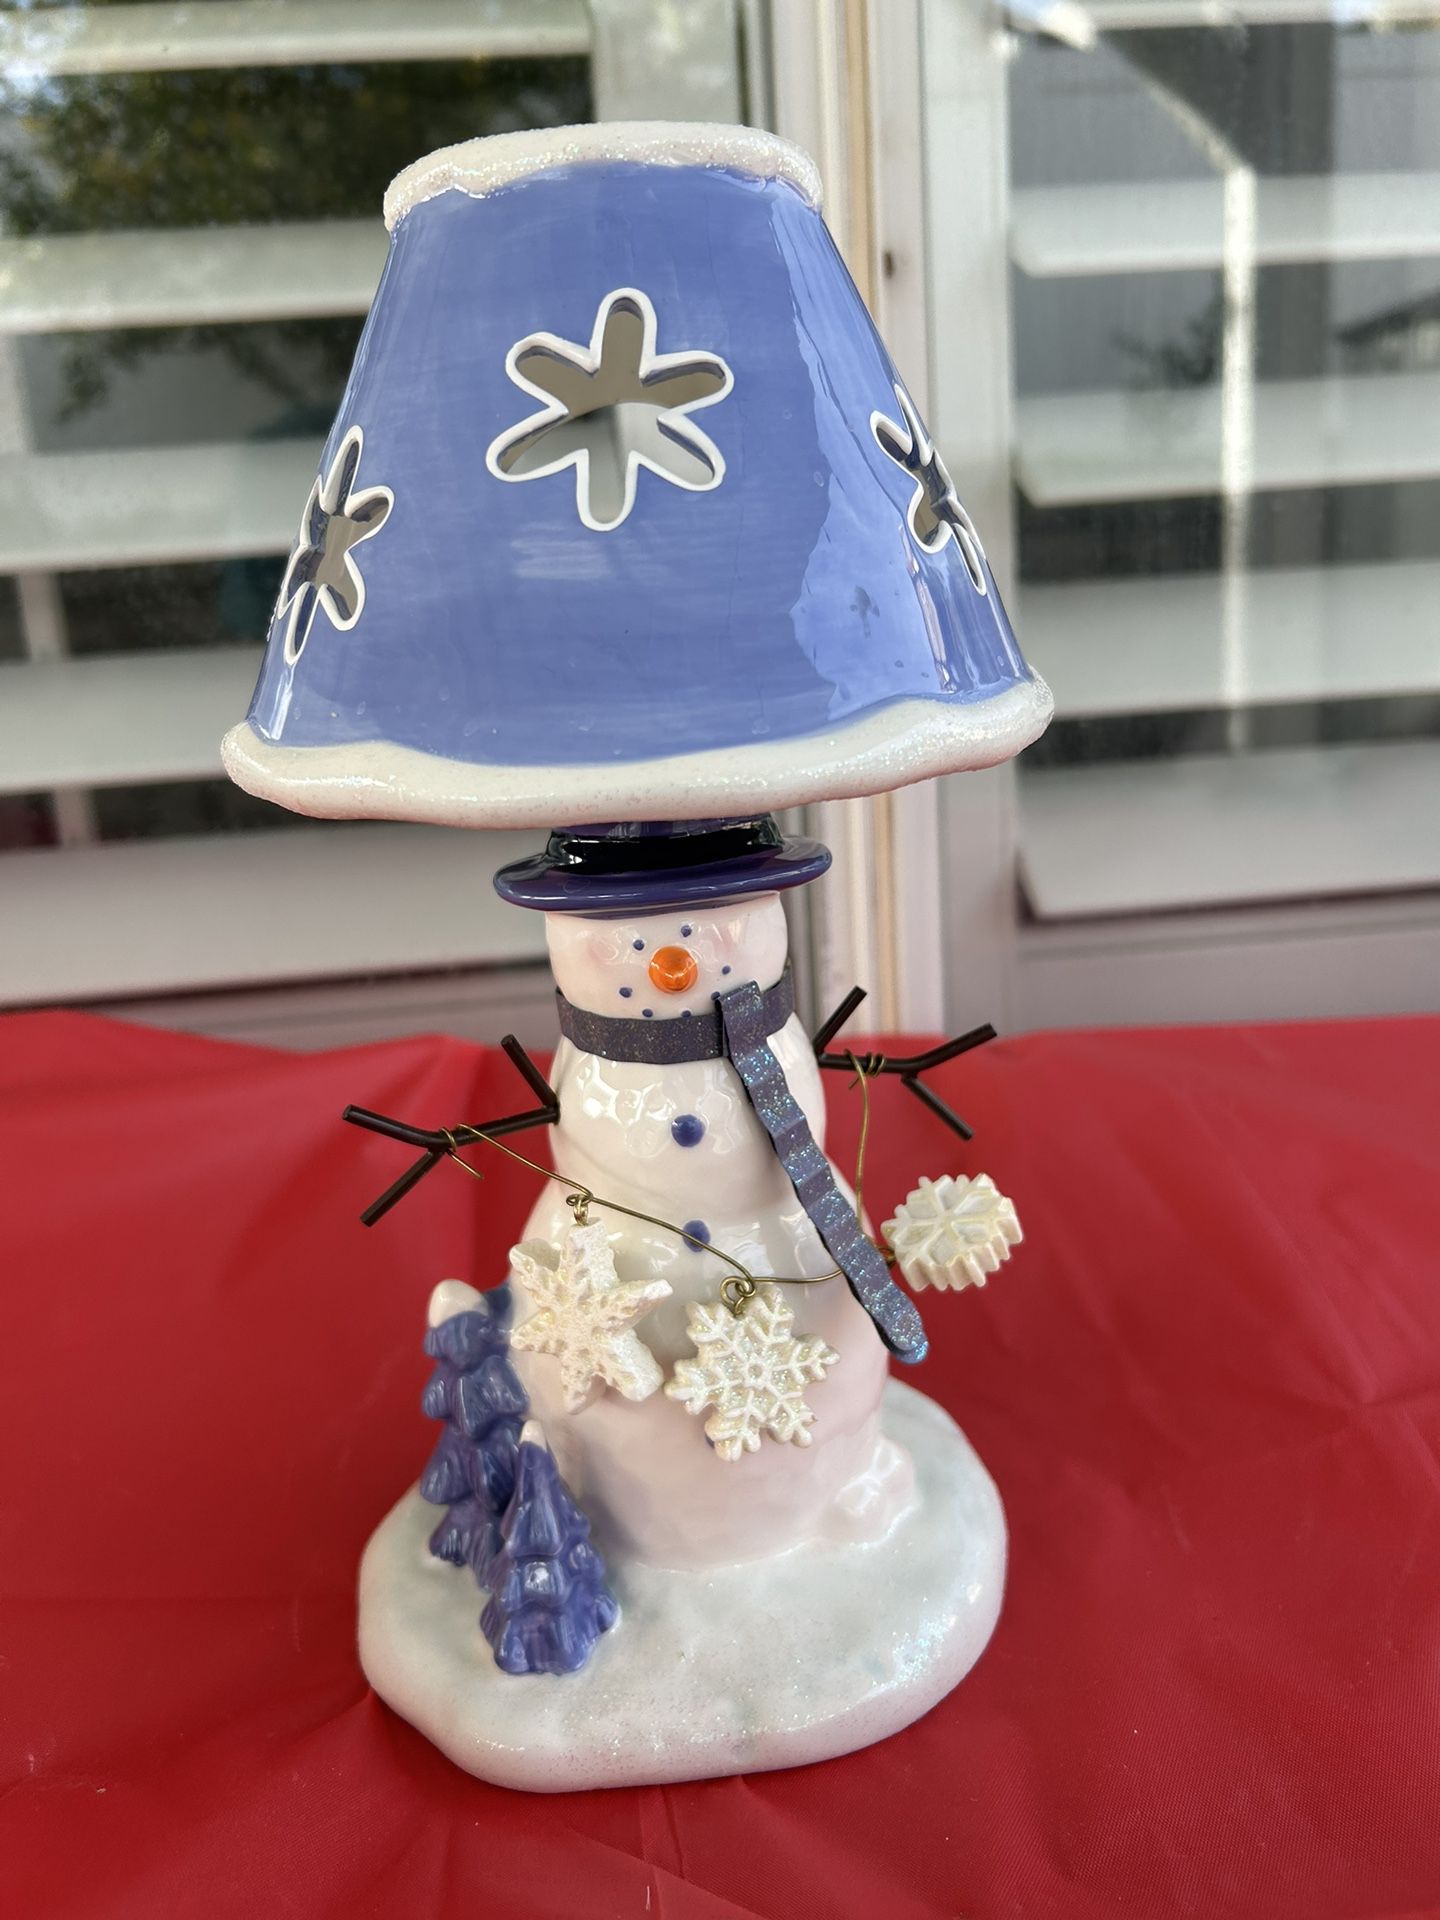 CANDLE HOLDER SNOWMAN LAMP - $15.00